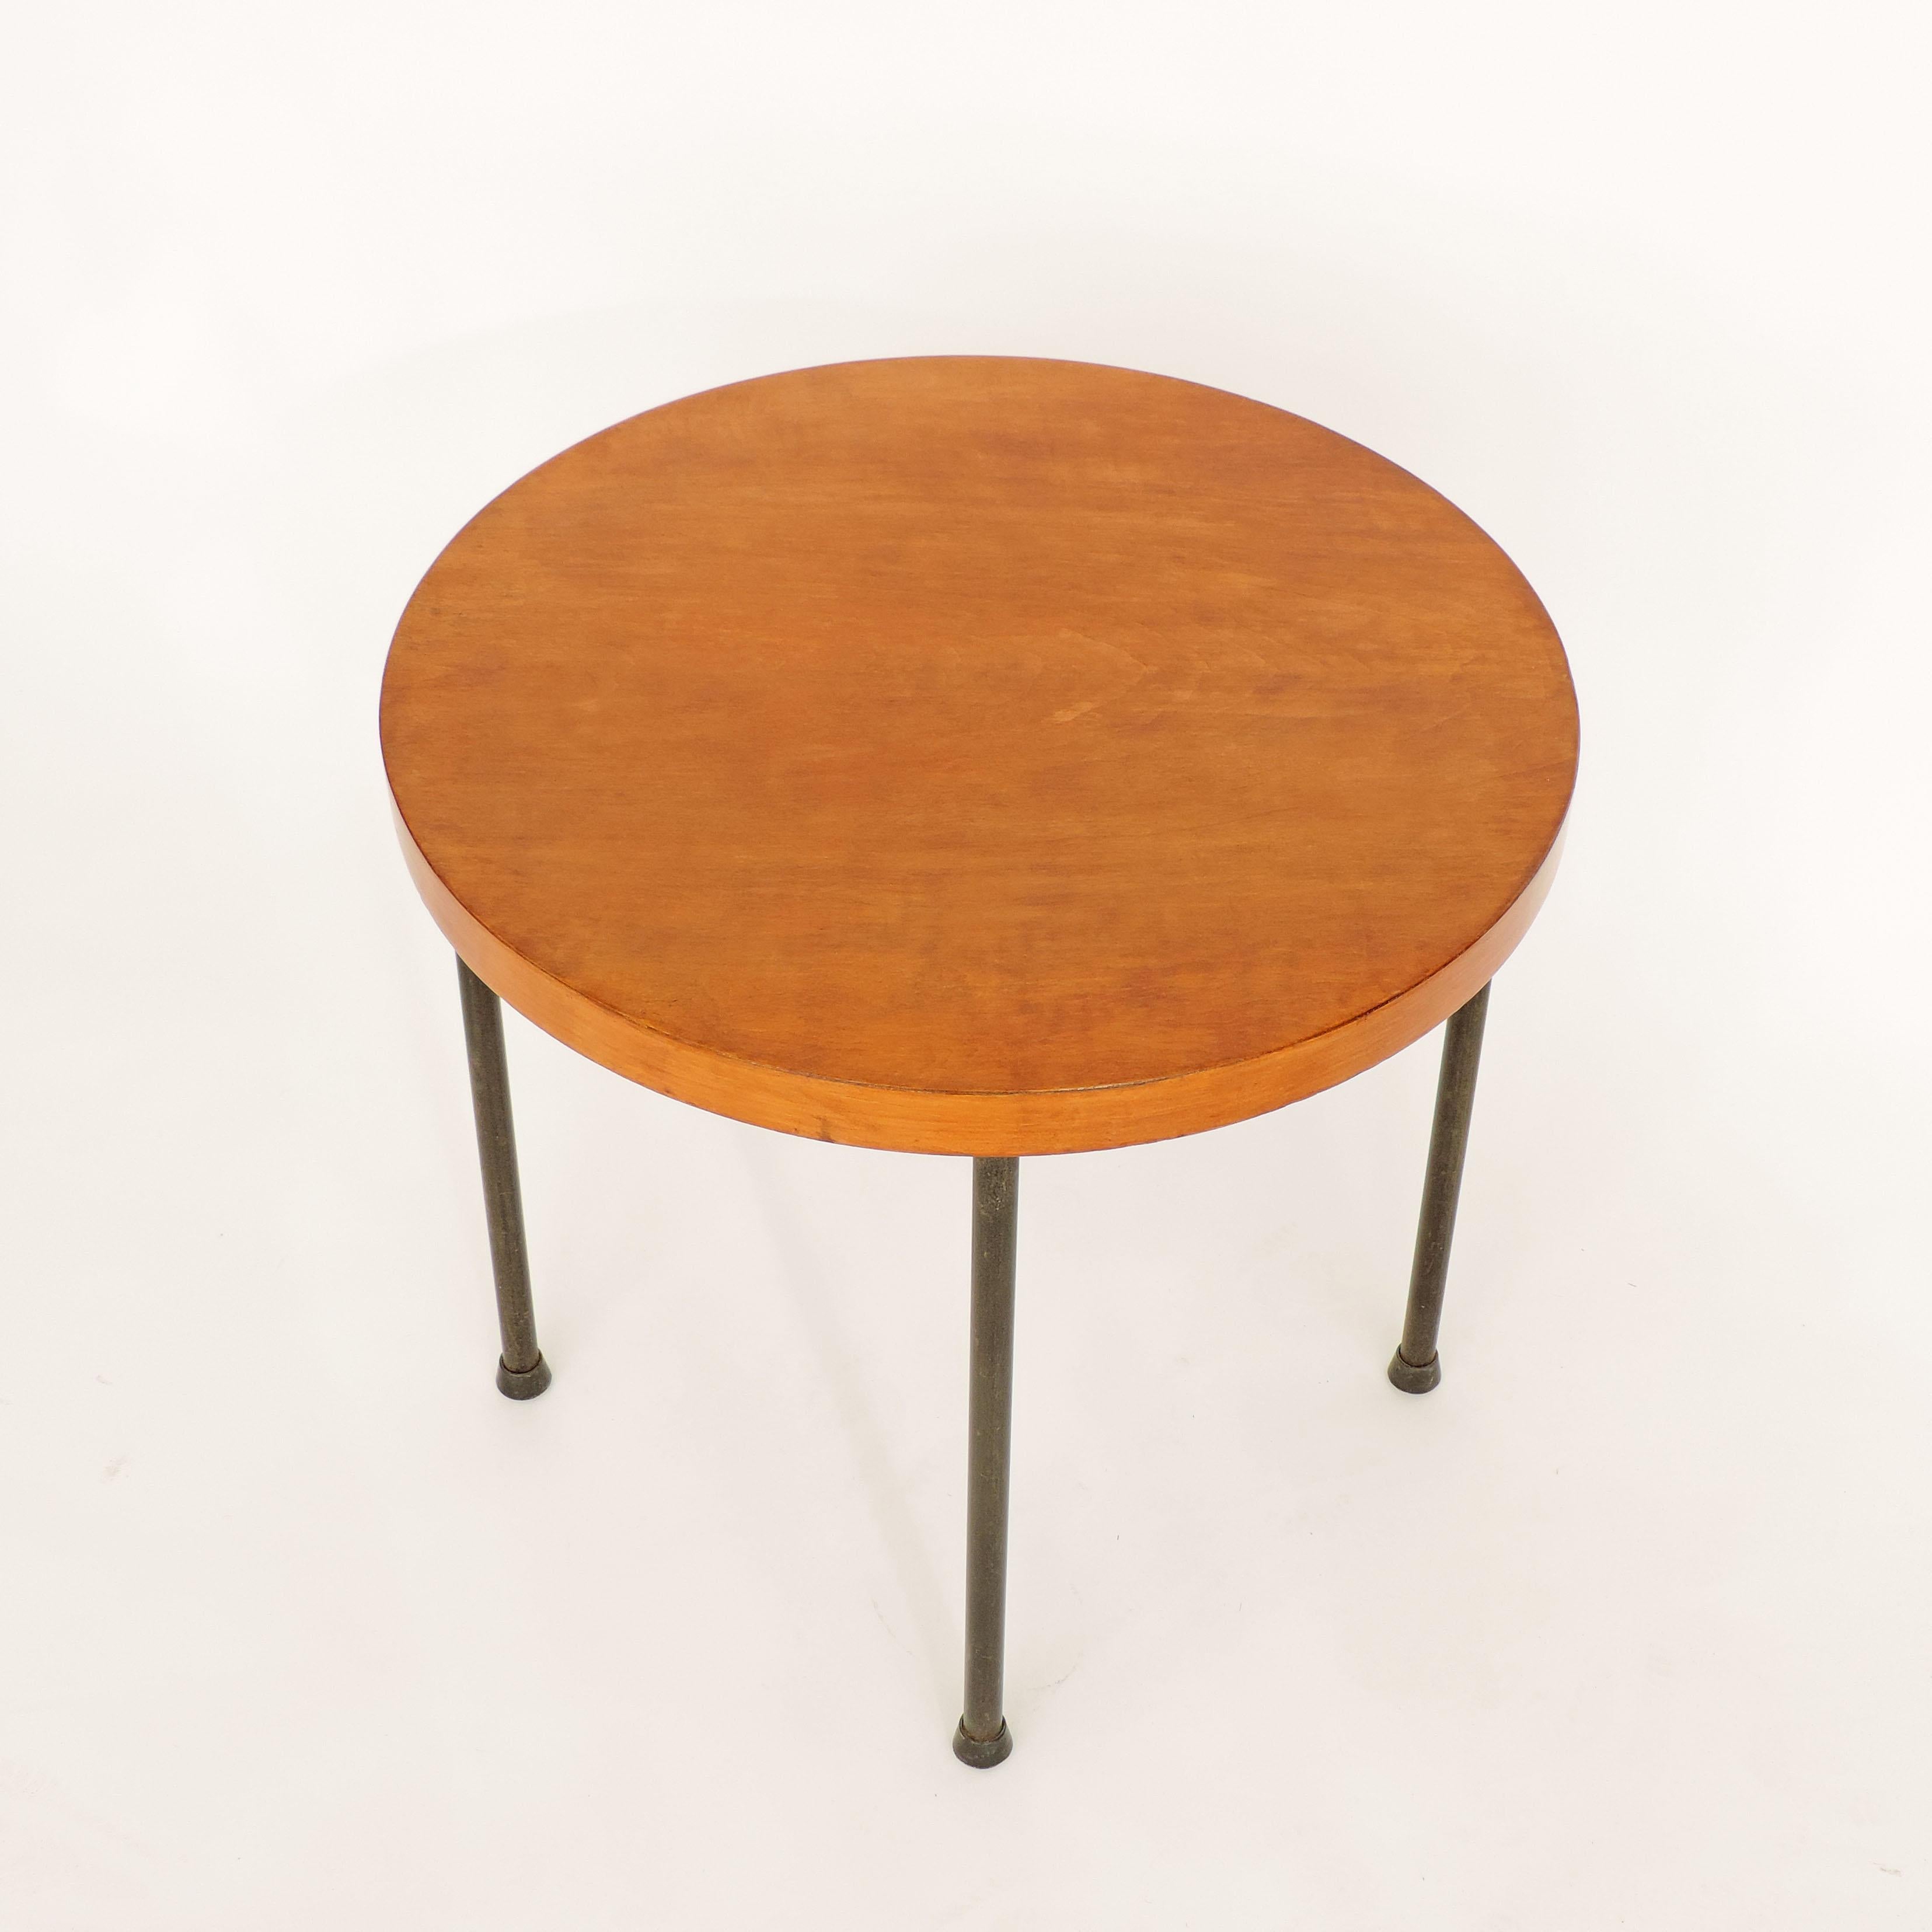 European Set of Three Wood and Metal Side Tables France or Italy, 1950s For Sale